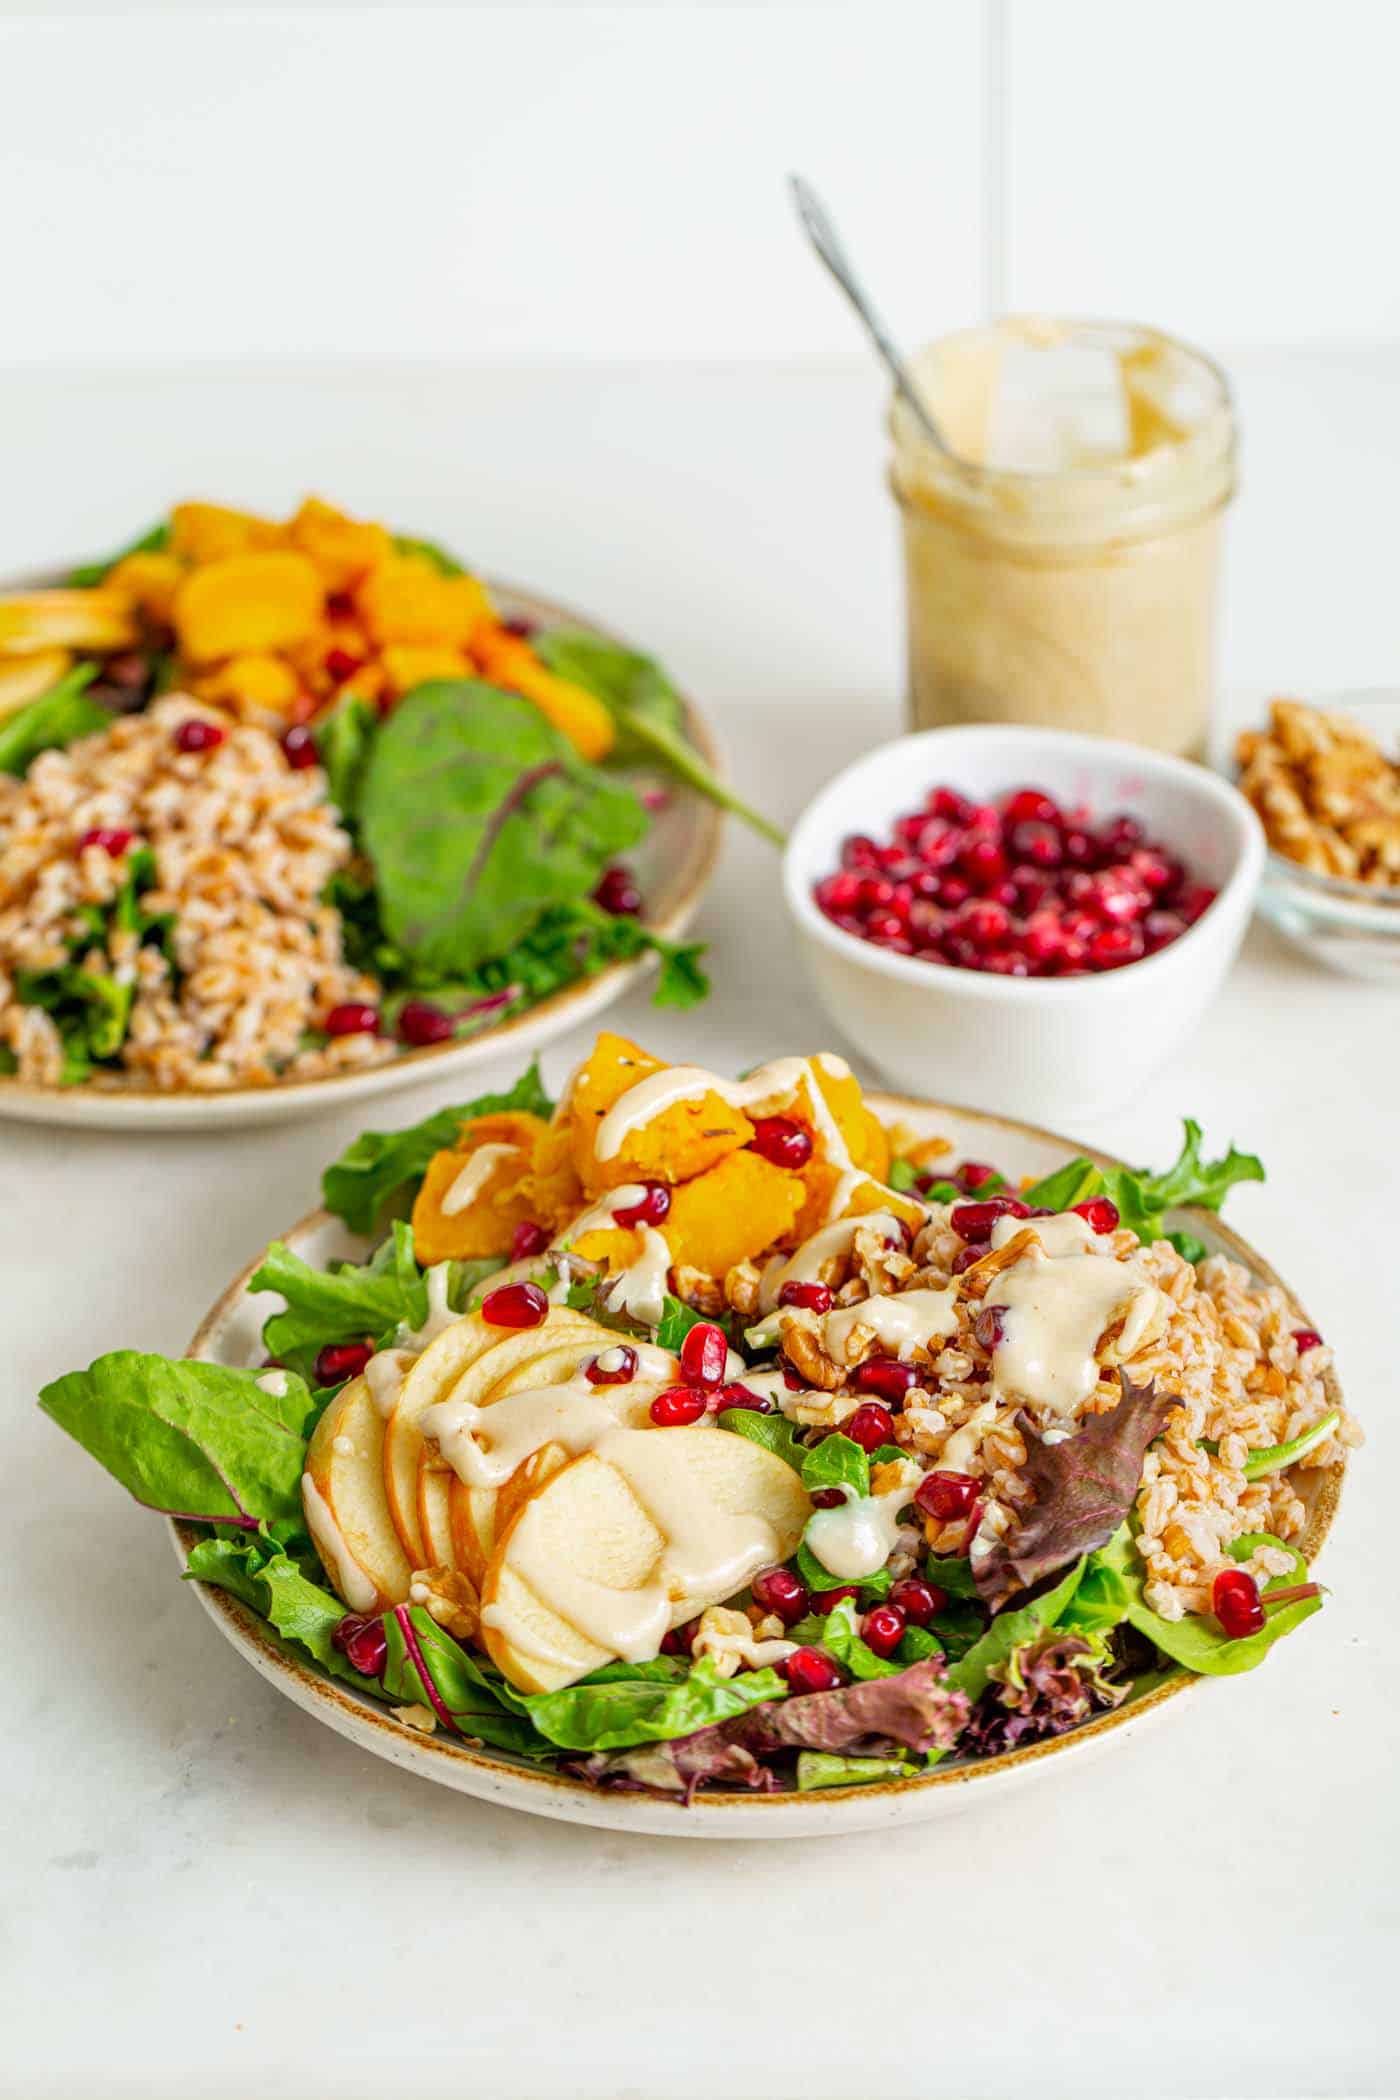 One up close shot and one far back shot of  bowls of salad, with leafy greens, sliced apples, squash, farro, topped with pomegranate seeds and creamy dressing dishes of pomegranate seeds and nuts sit in the background with a jar of extra dressing.